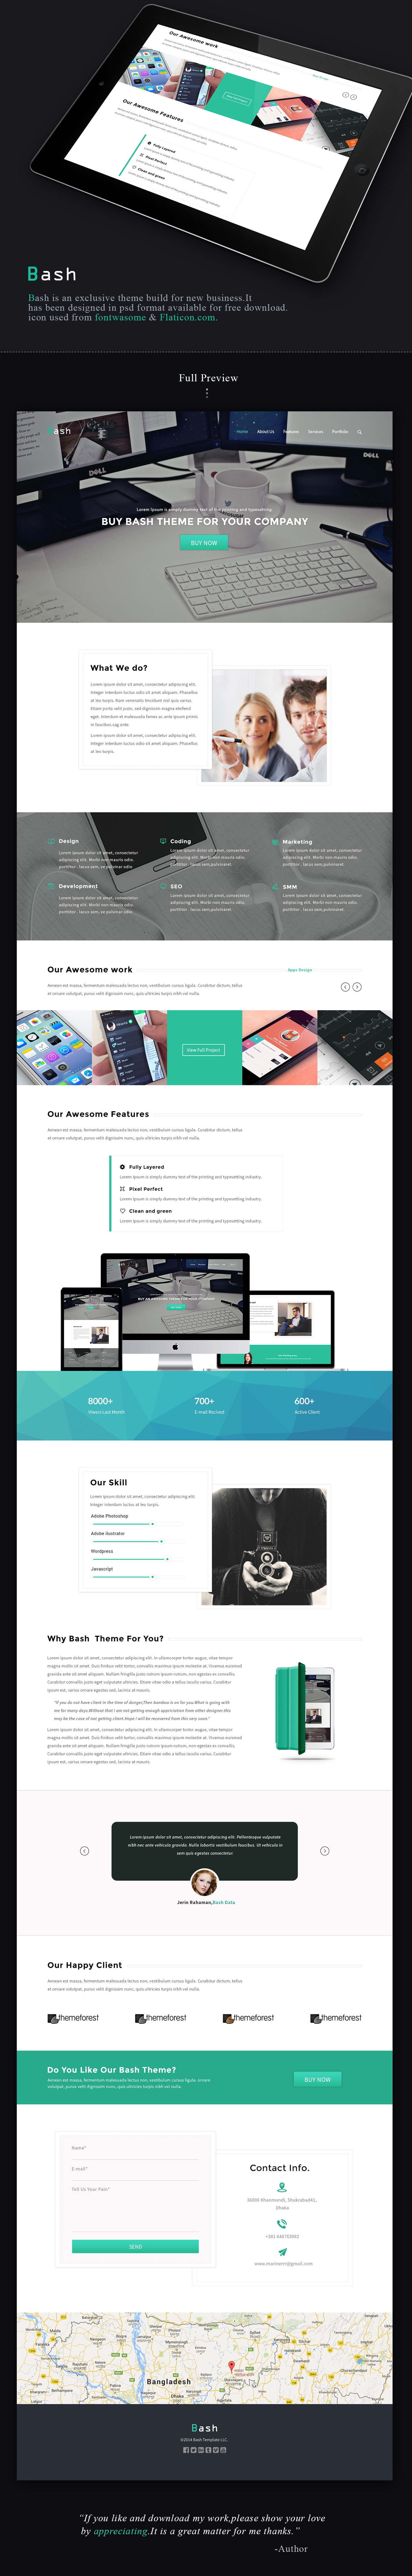 UI ux bash landing page creative template  psd free free psd free web template clean minimal design design corporate apps apps design